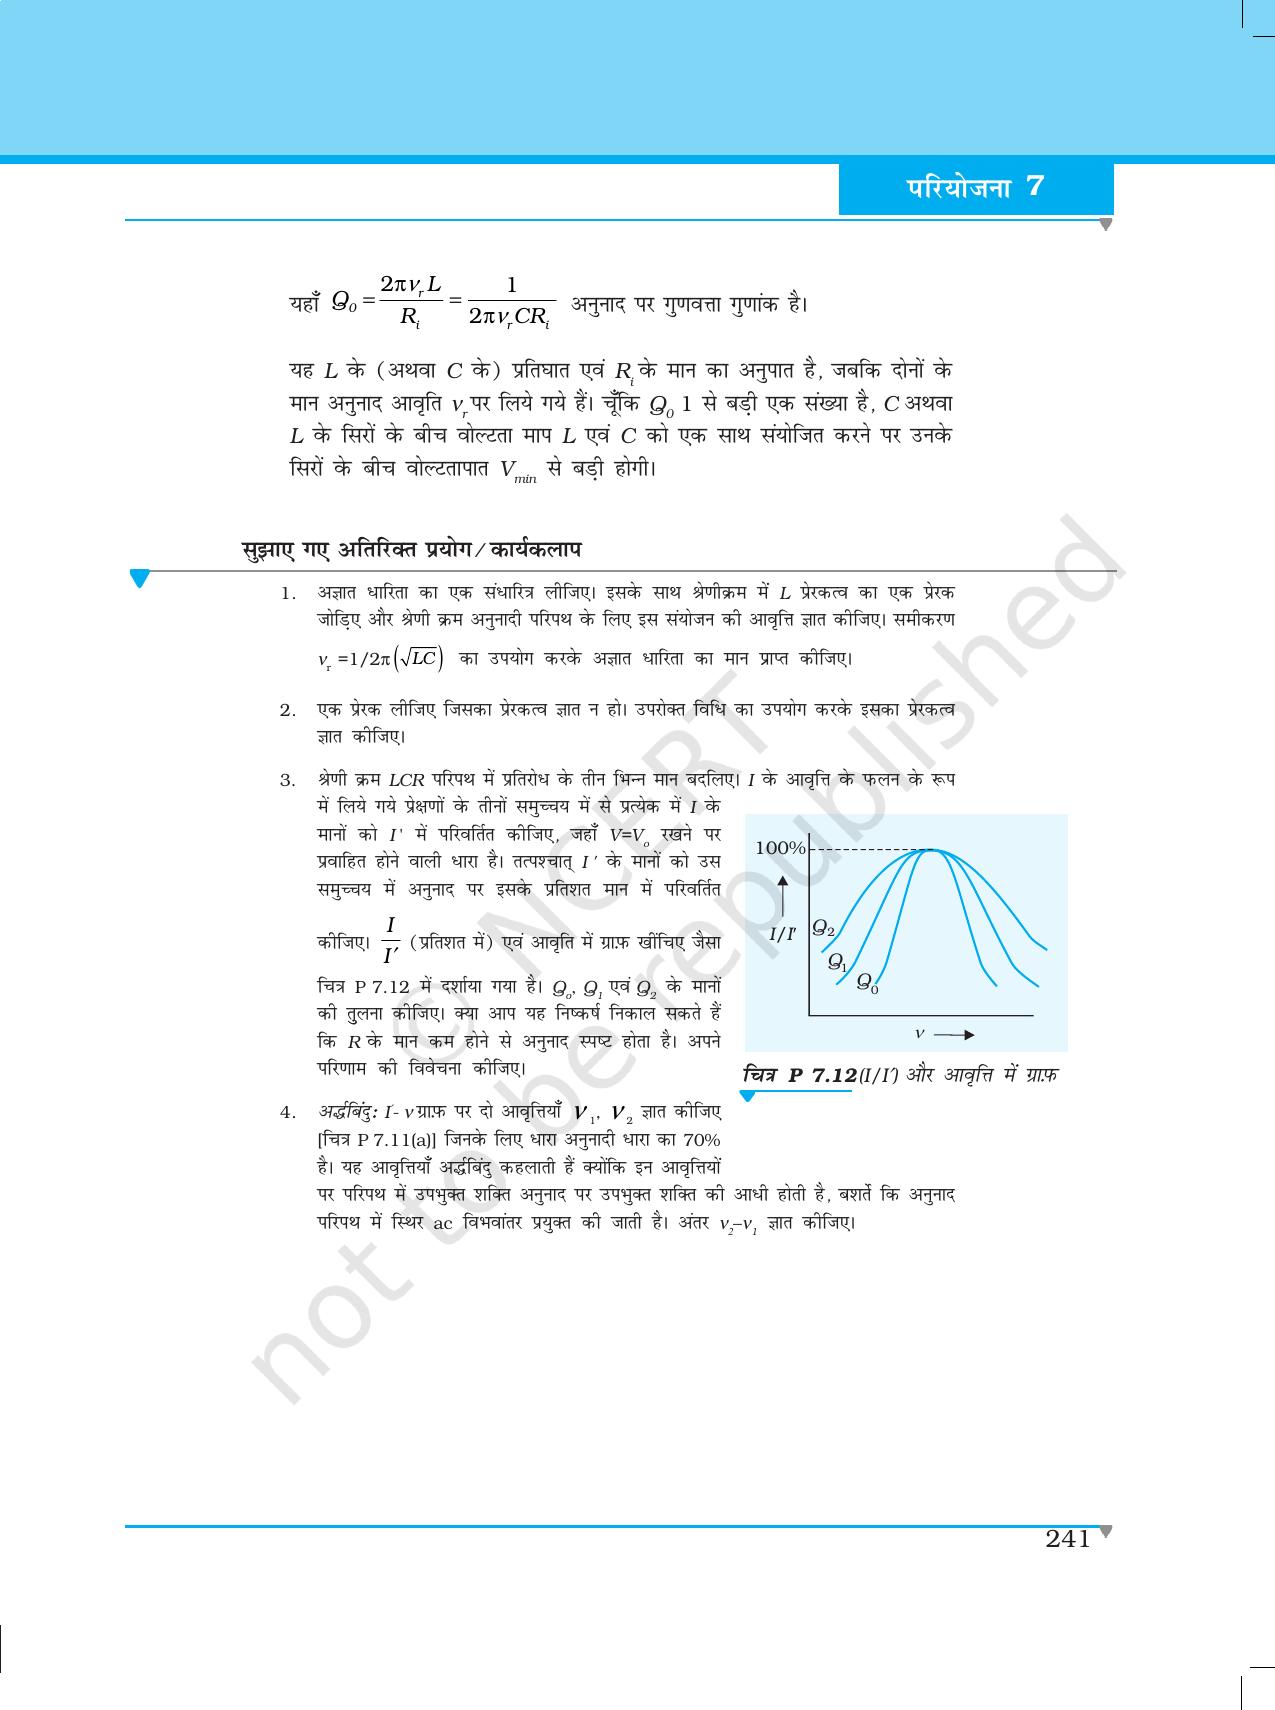 NCERT Laboratory Manuals for Class XII भौतिकी - परियोजना (1 - 7) - Page 35